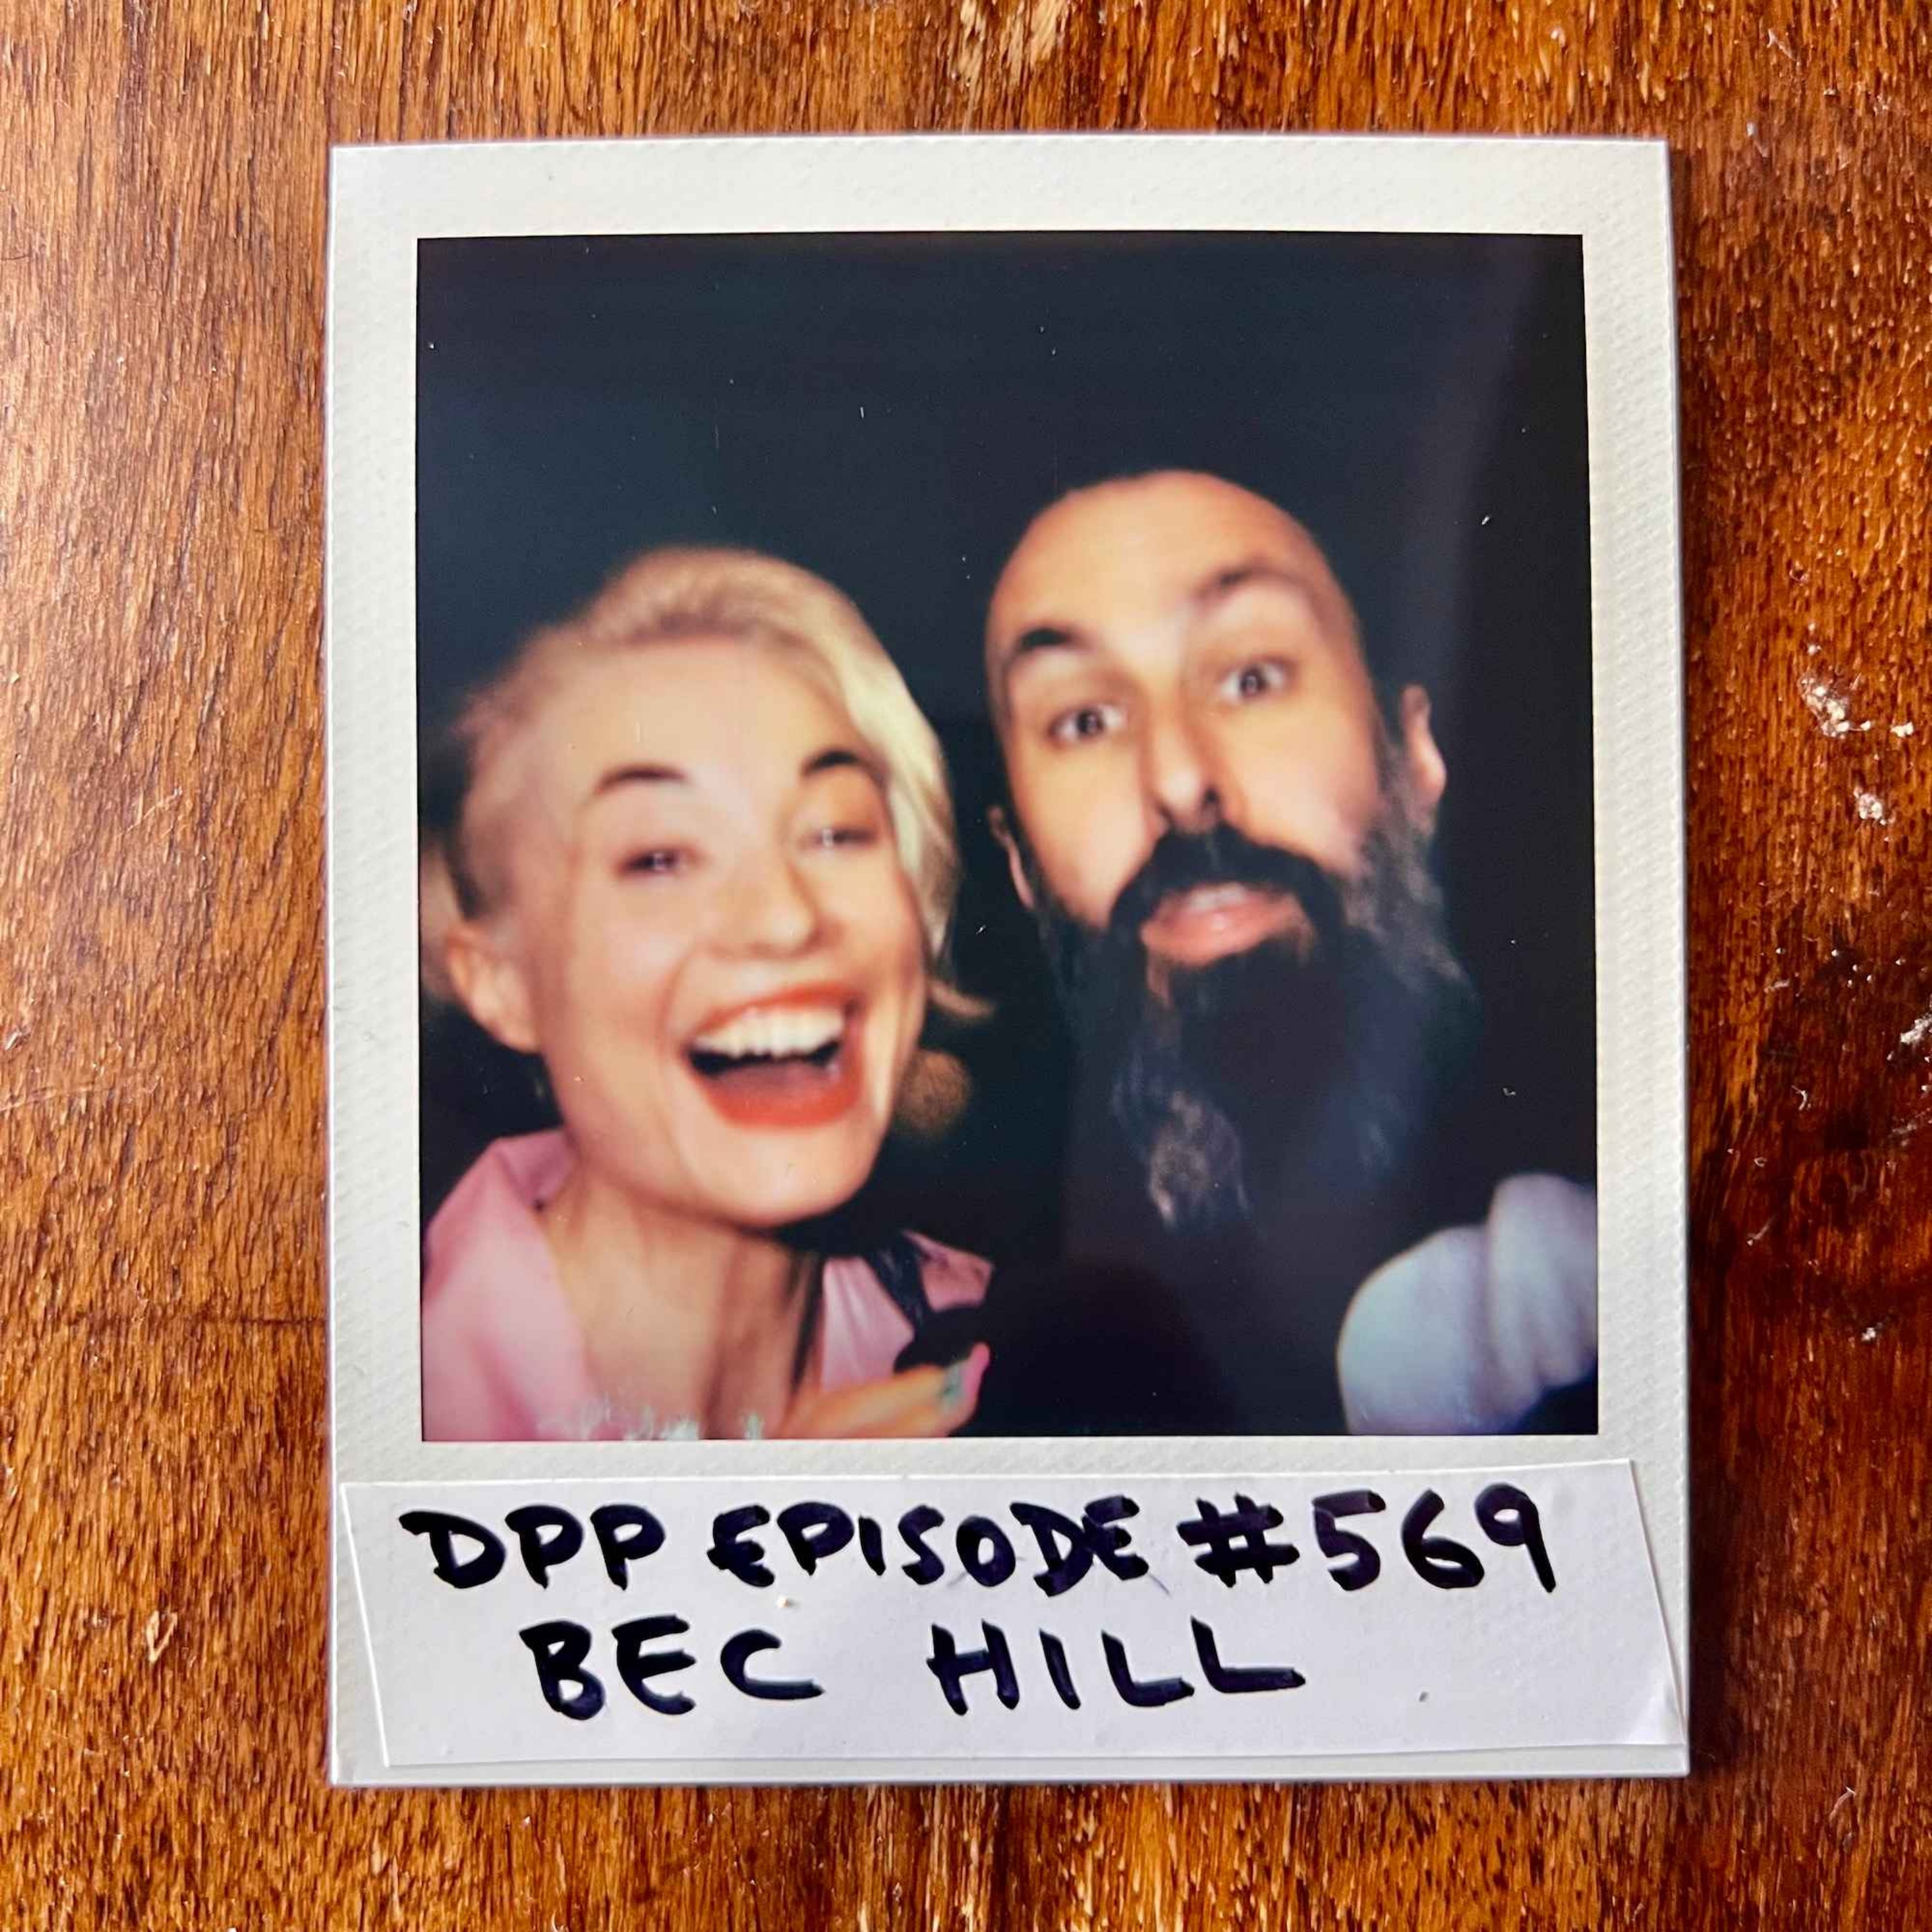 Bec Hill • Distraction Pieces Podcast with Scroobius Pip #569